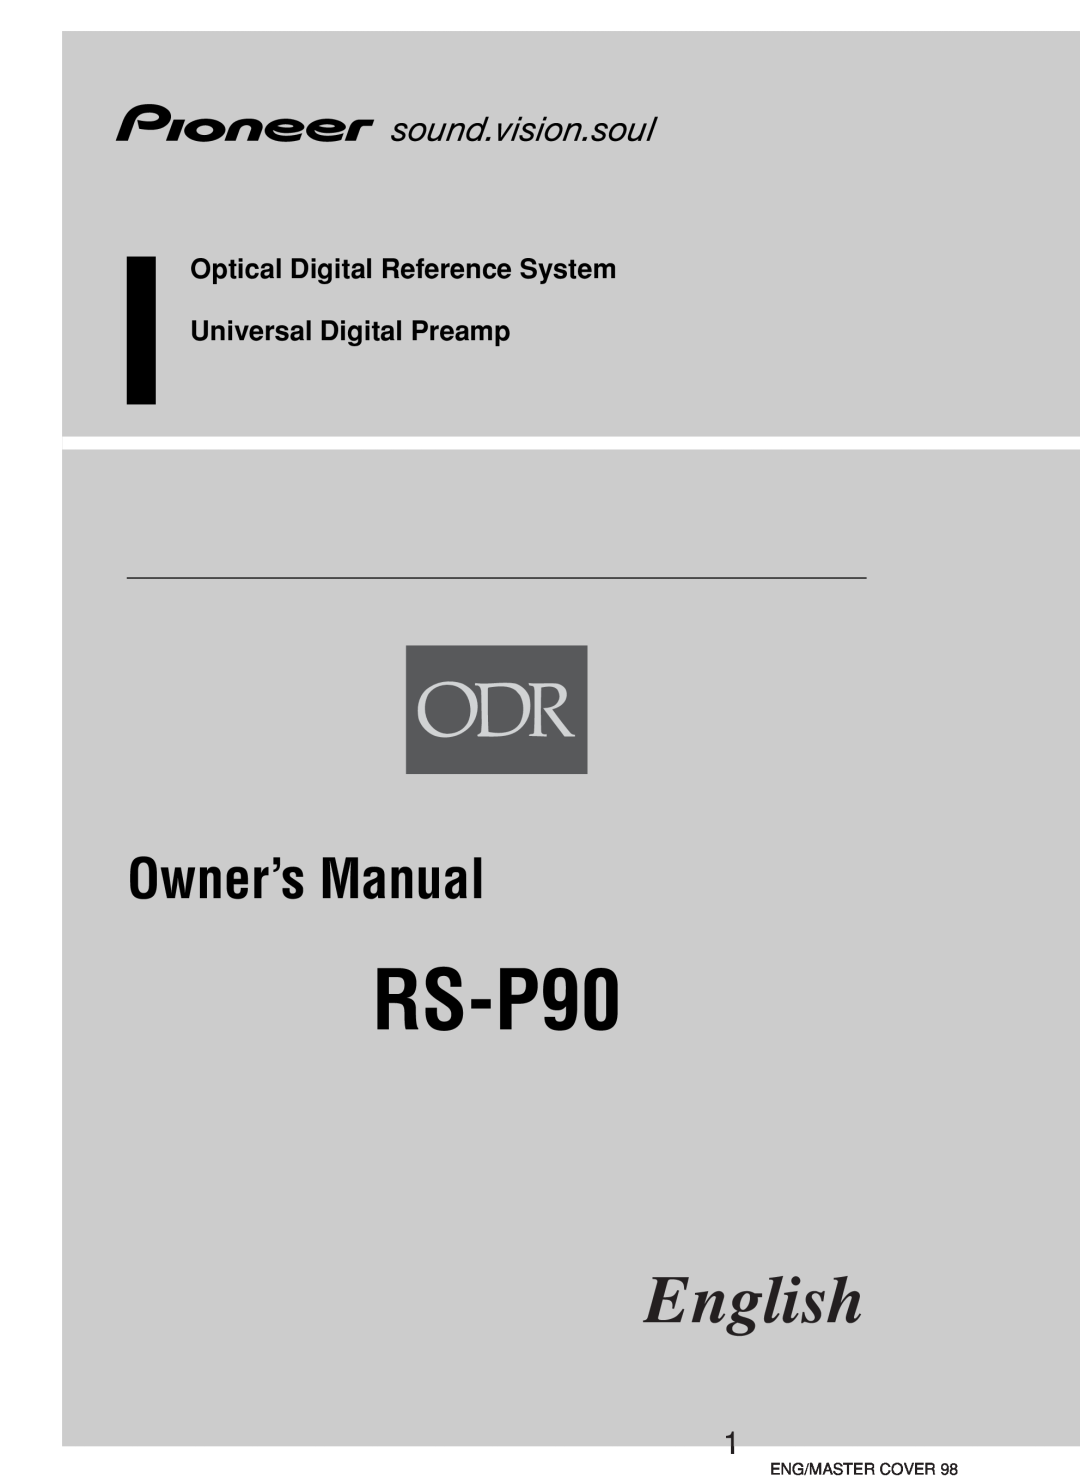 Pioneer RS-D7R owner manual RS-P90, English, Owner’s Manual, Optical Digital Reference System Universal Digital Preamp 